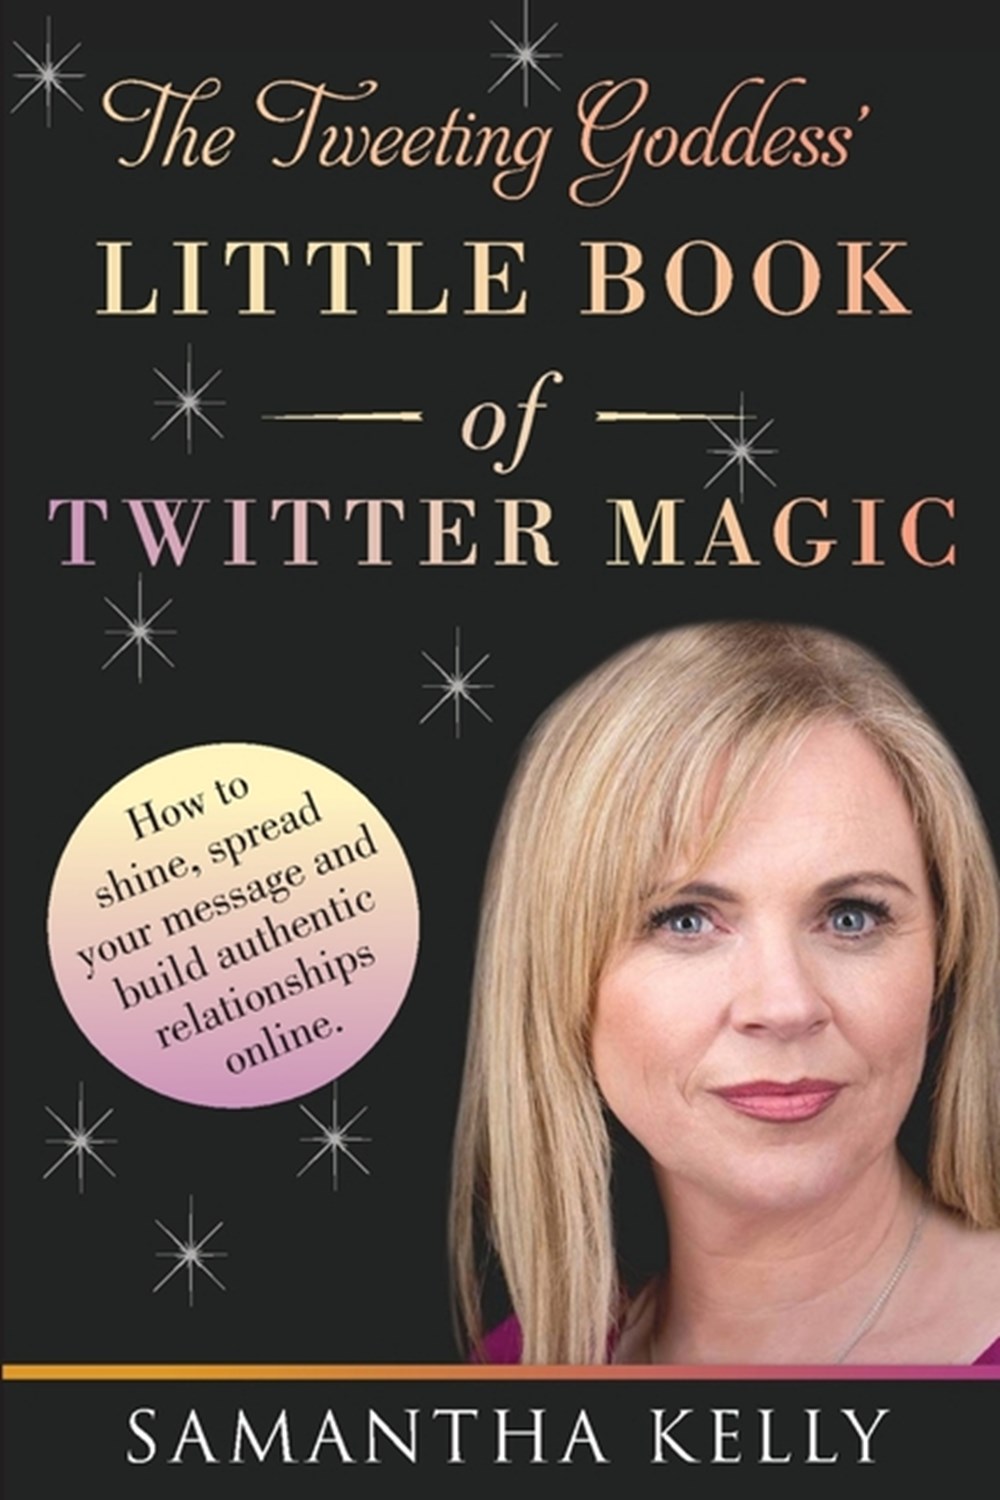 Tweeting Goddess Little Book Of Twitter Magic: How to shine, spread your message and build authentic